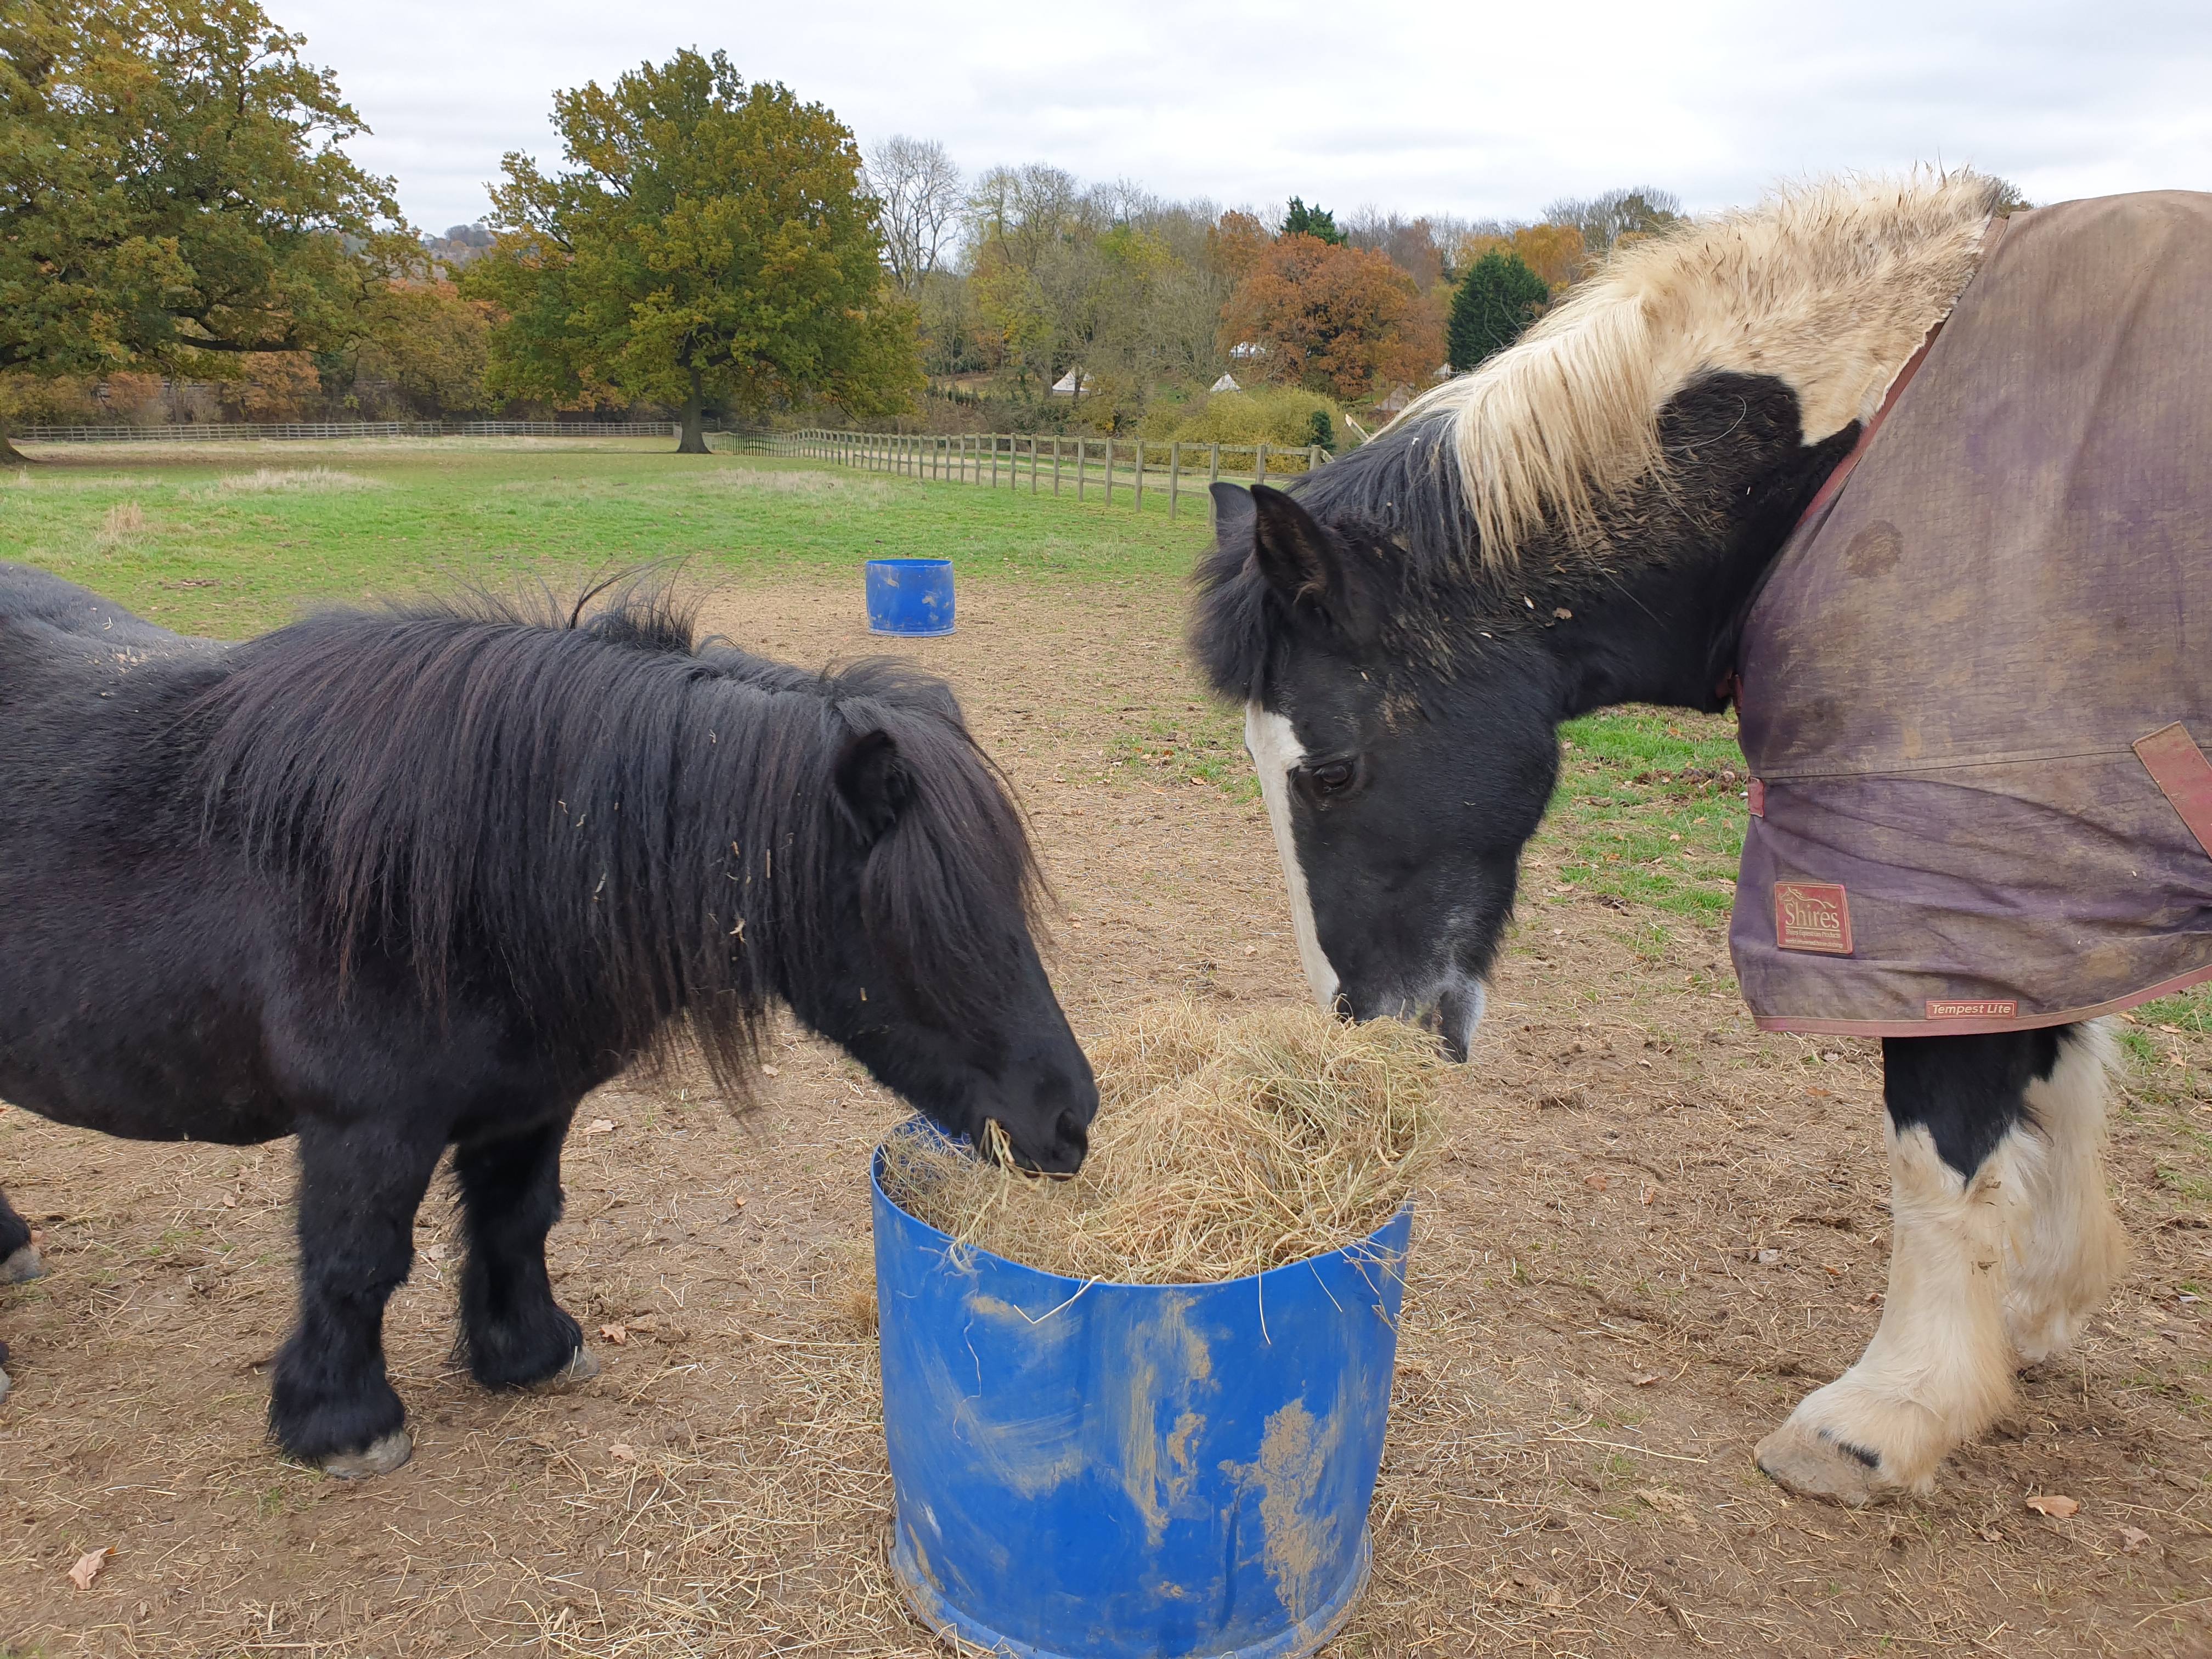 The Not-So-Secret Diary of Diva the Shetland Pony - The Mud Has Arrived!